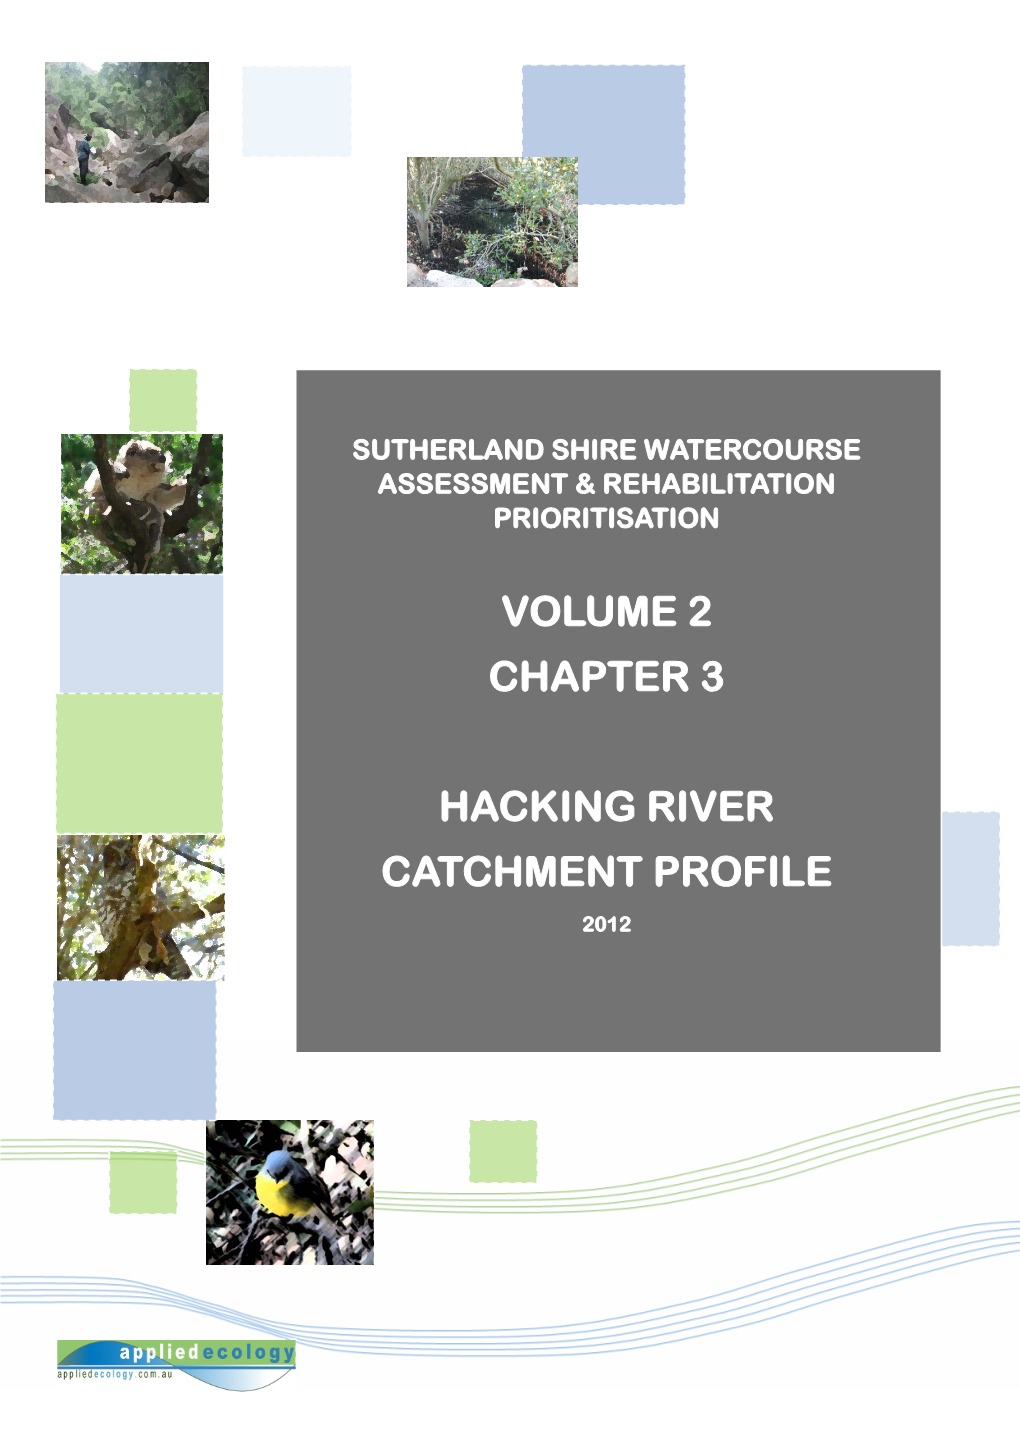 Volume 2 Chapter 3 Hacking River Catchment Profile